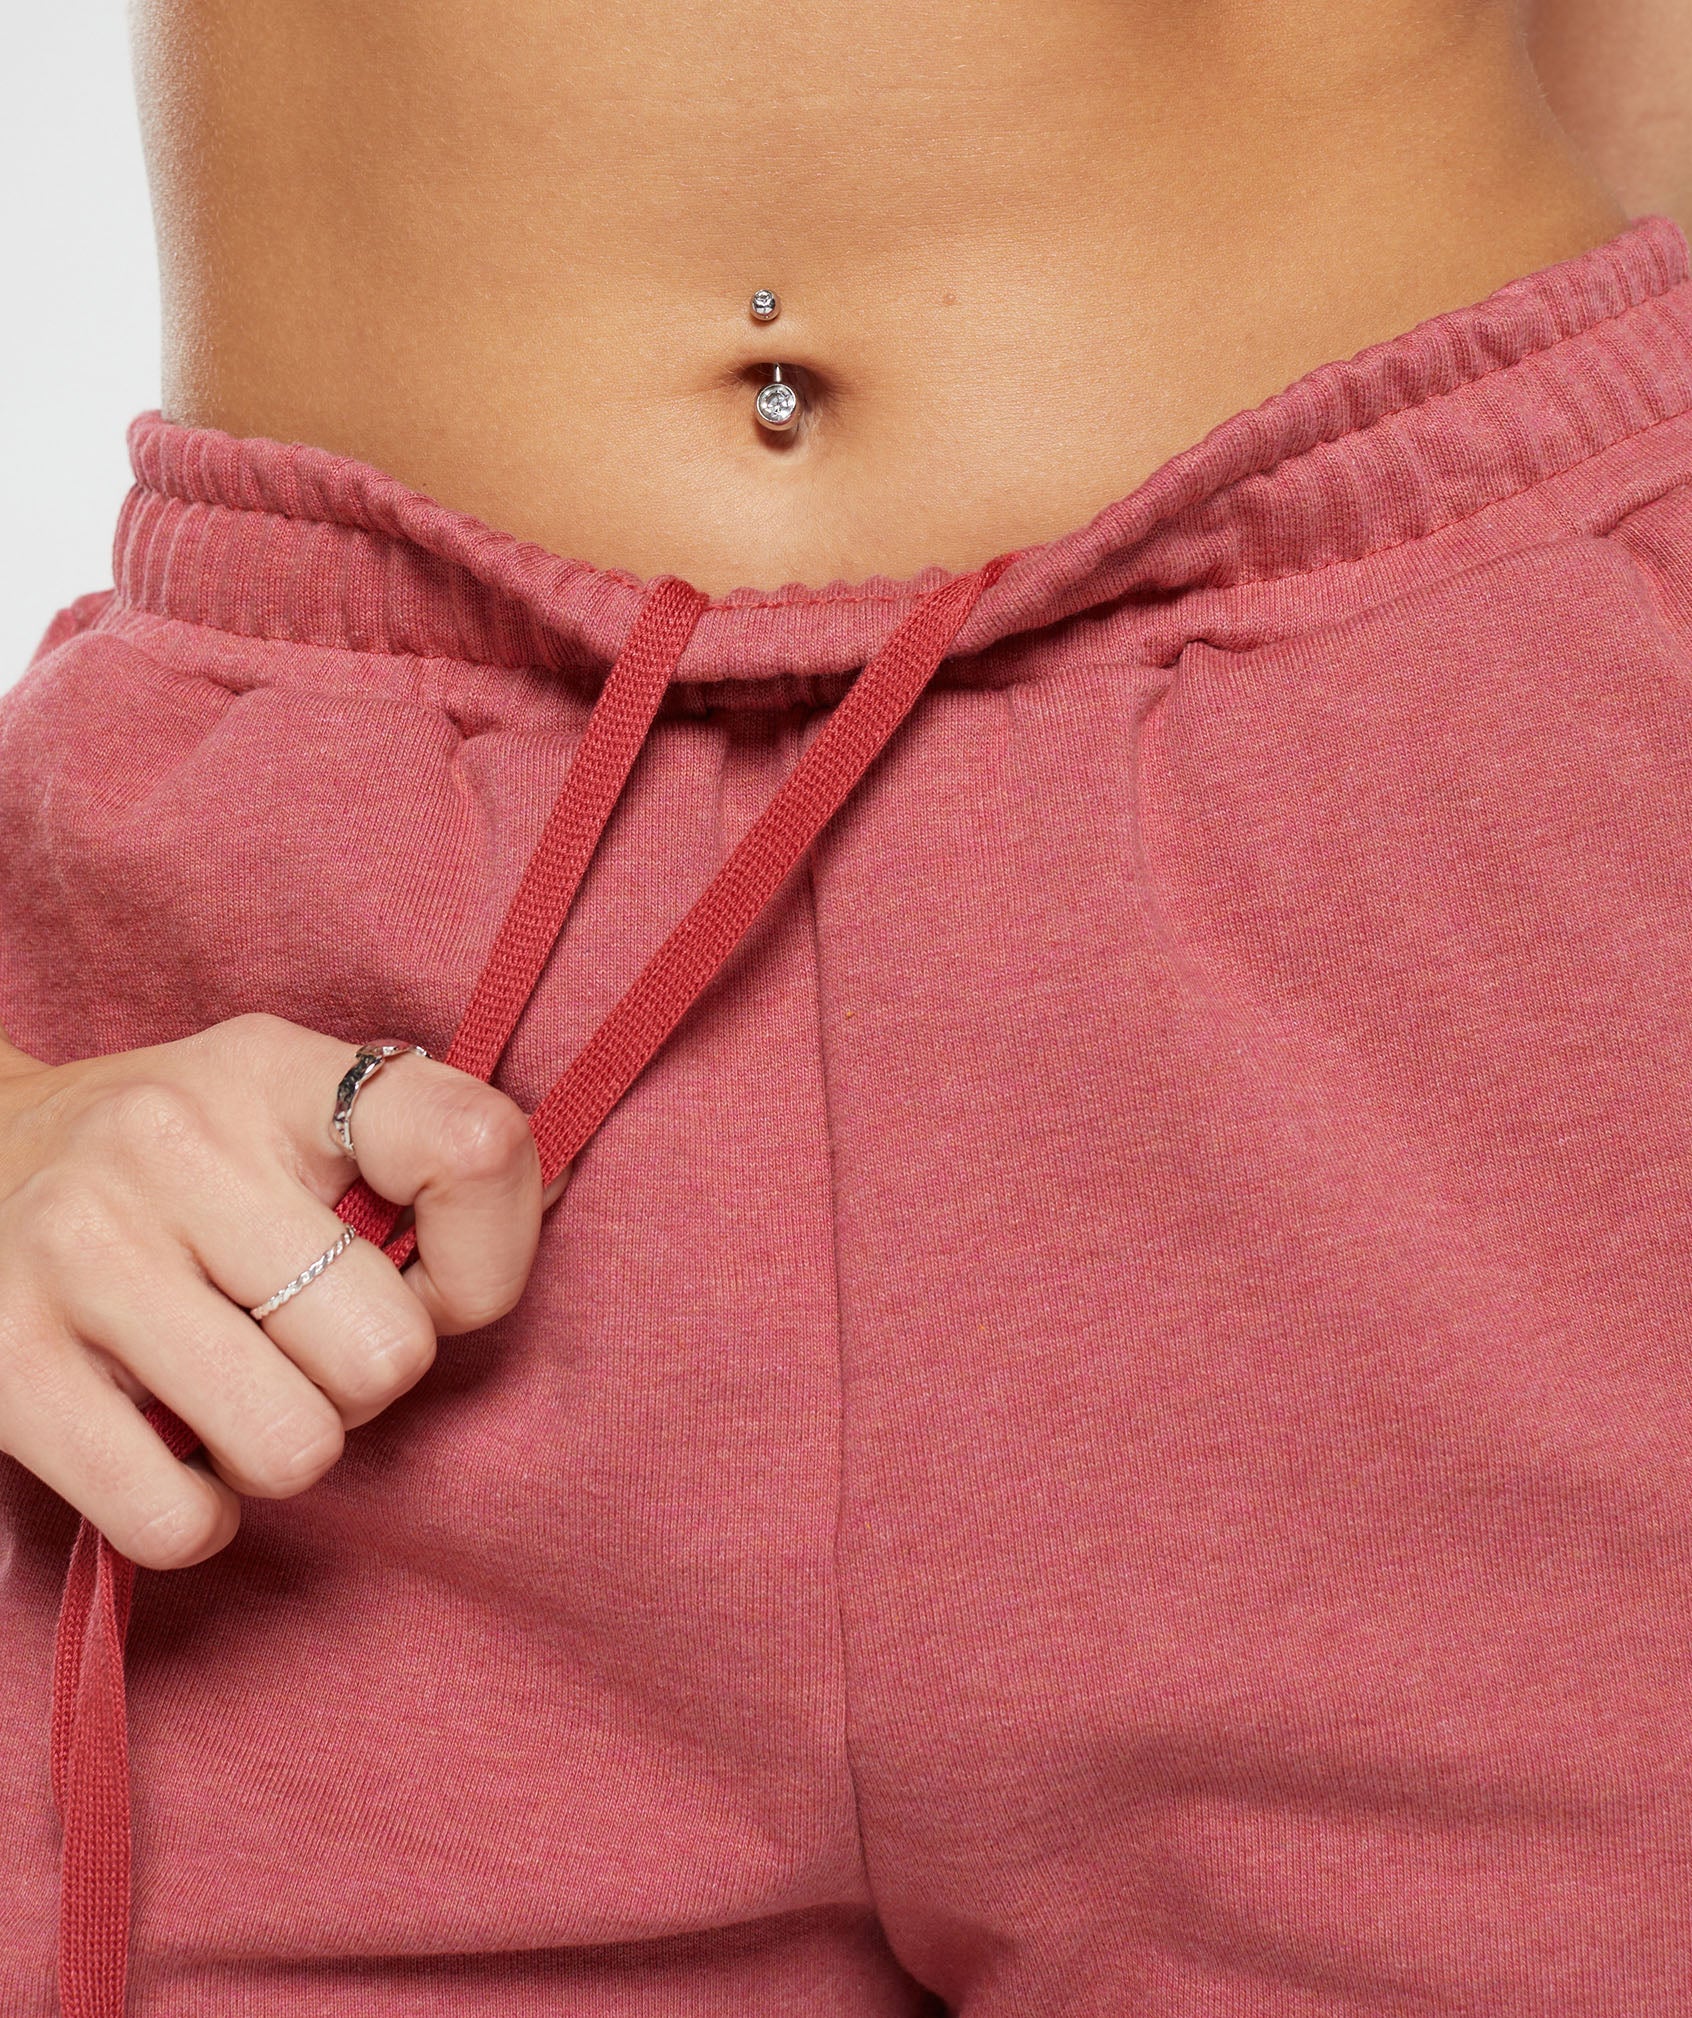 Rest Day Sweat Shorts in Heritage Pink Marl - view 6